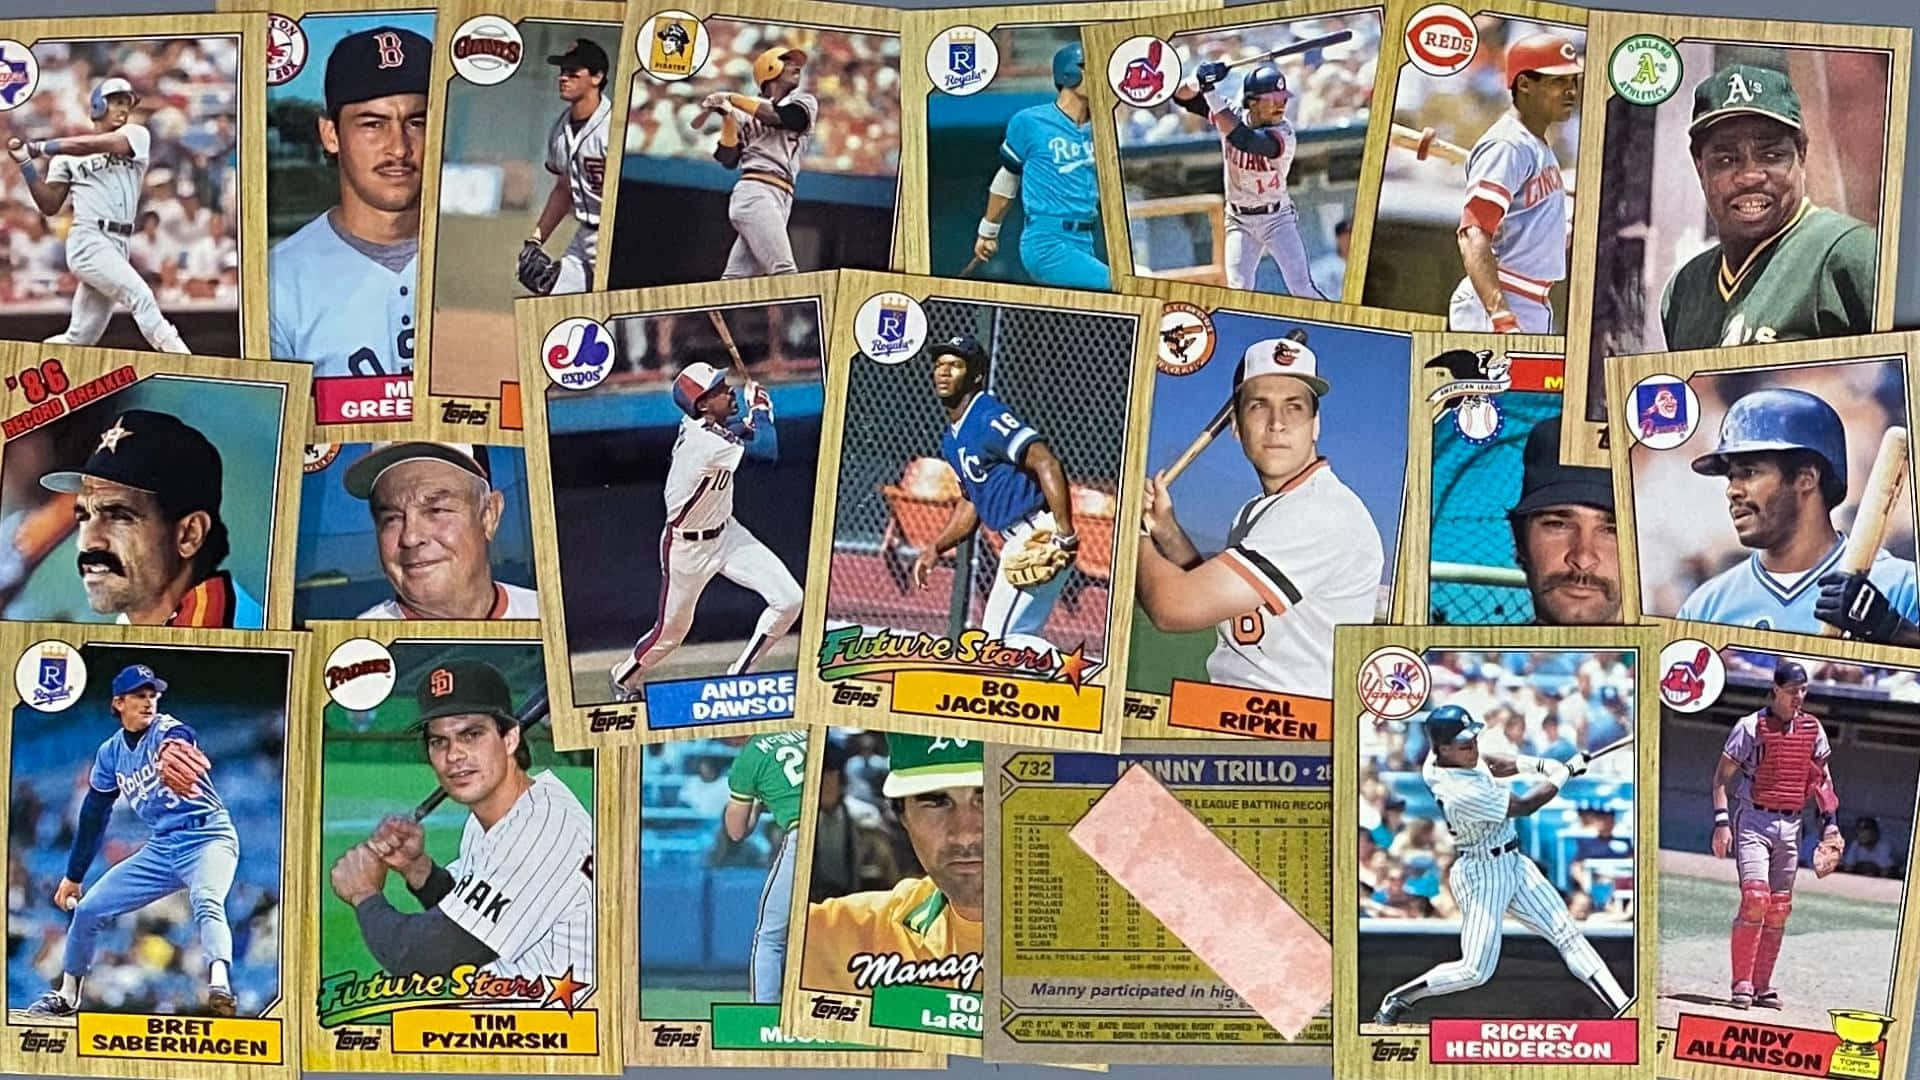 A collection of vintage baseball cards featuring legendary players Wallpaper